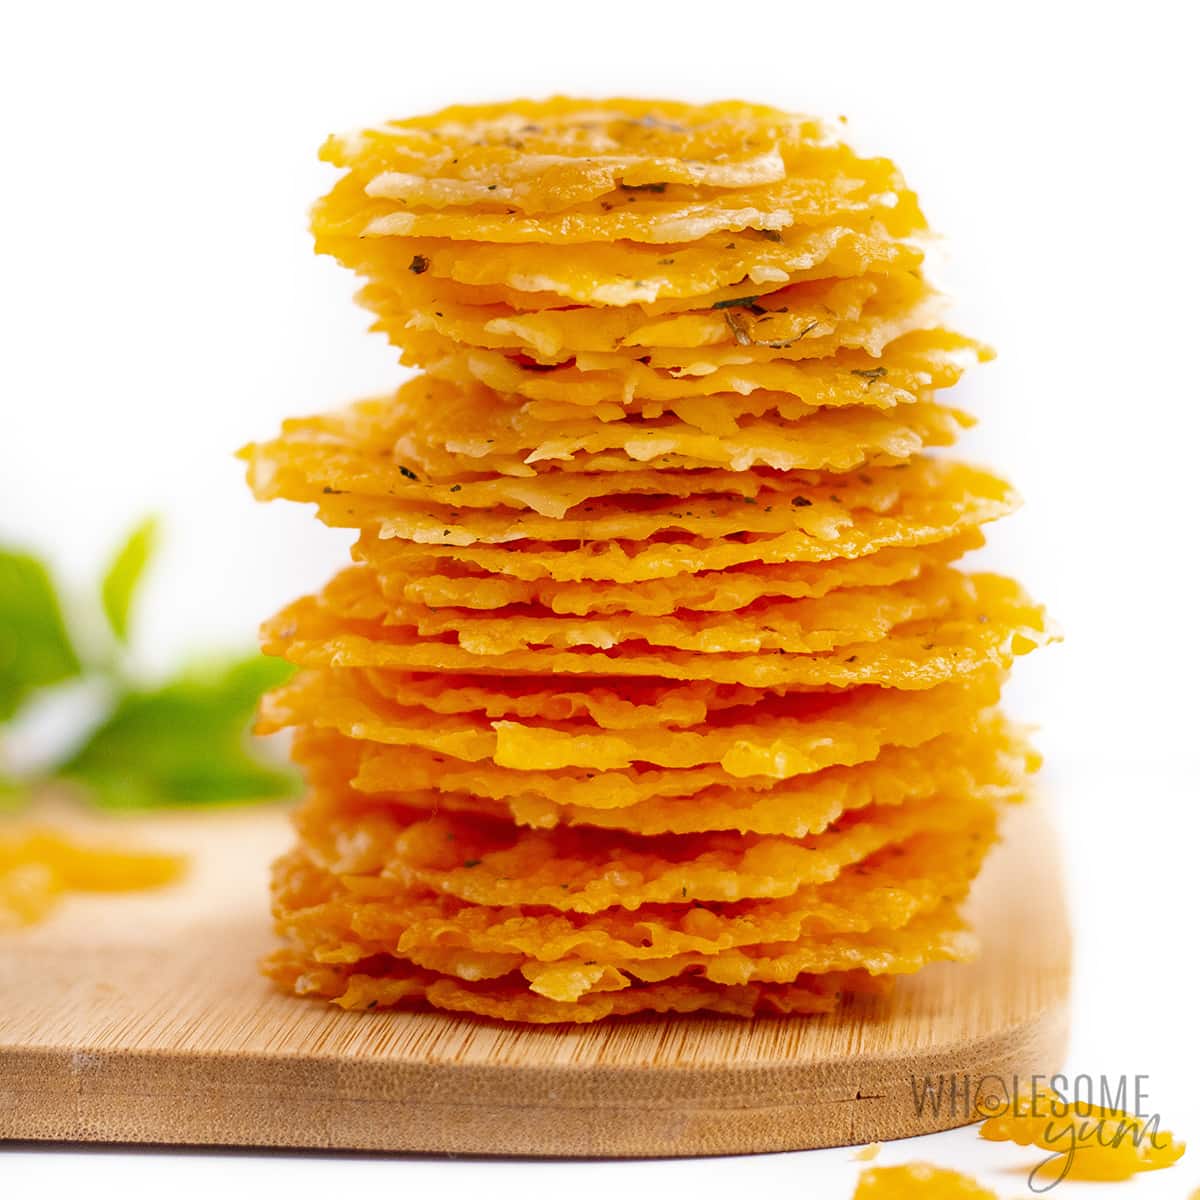 Baked cheese crisps (cheddar parmesan crisps) in a stack.